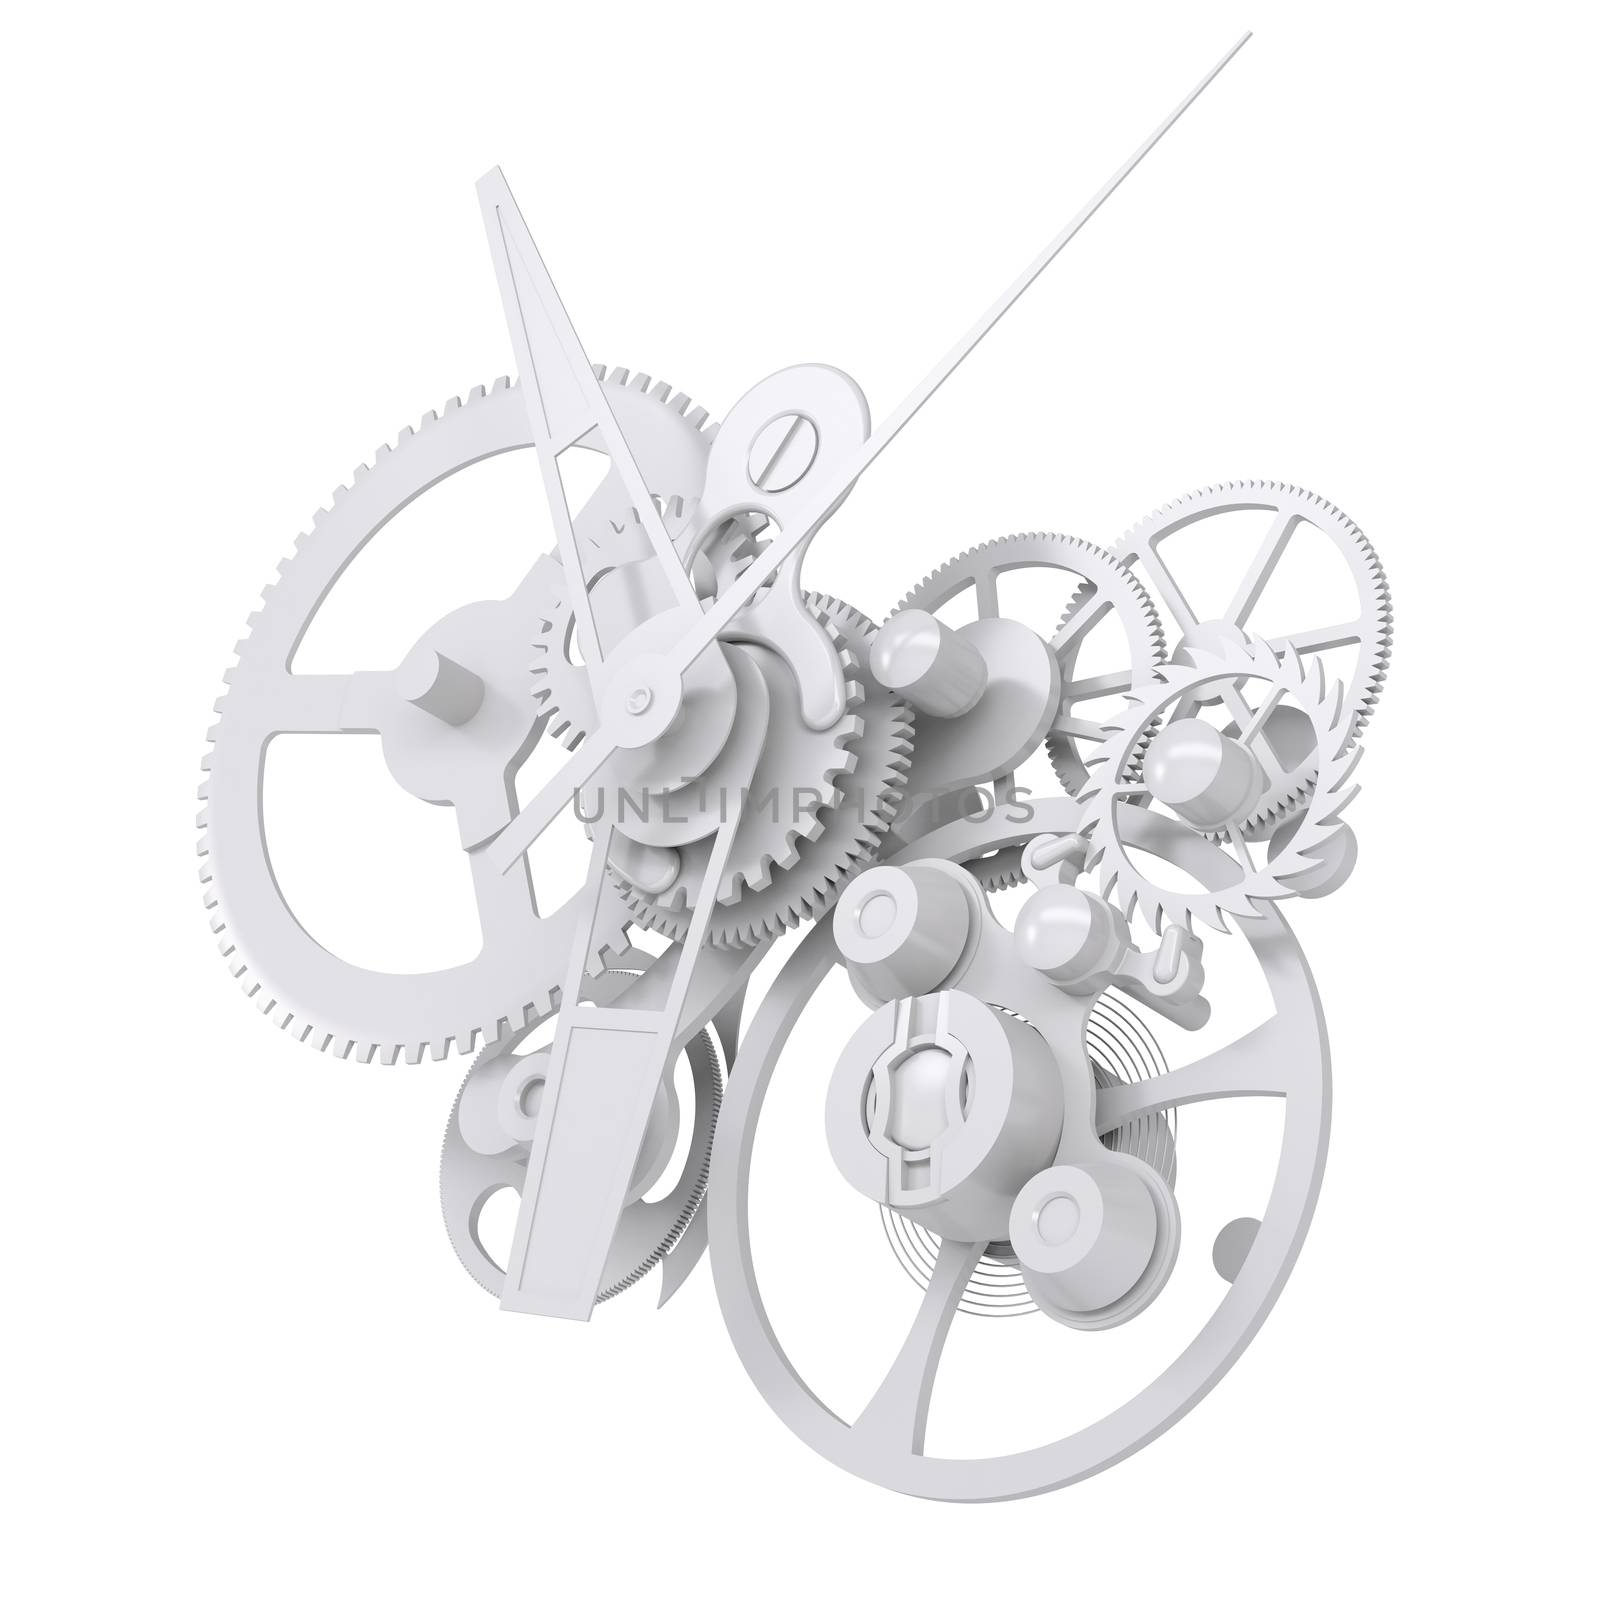 Concept watch mechanism. Isolated render on white background